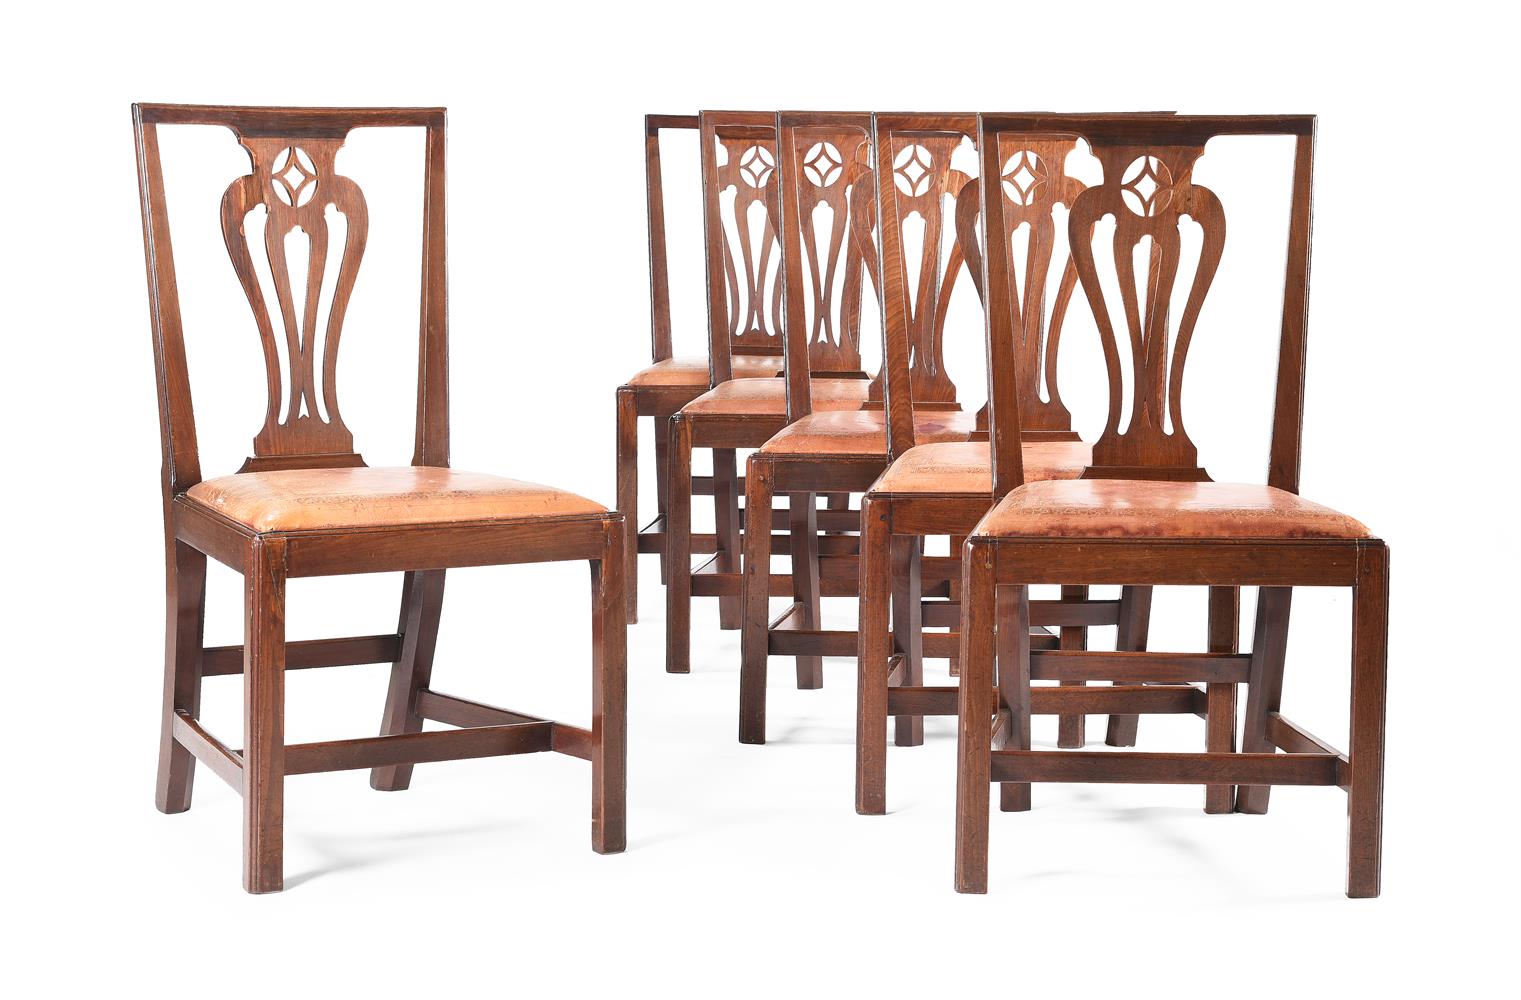 A SET OF SIX GEORGE III MAHOGANY DINING CHAIRS, LATE 18TH CENTURY